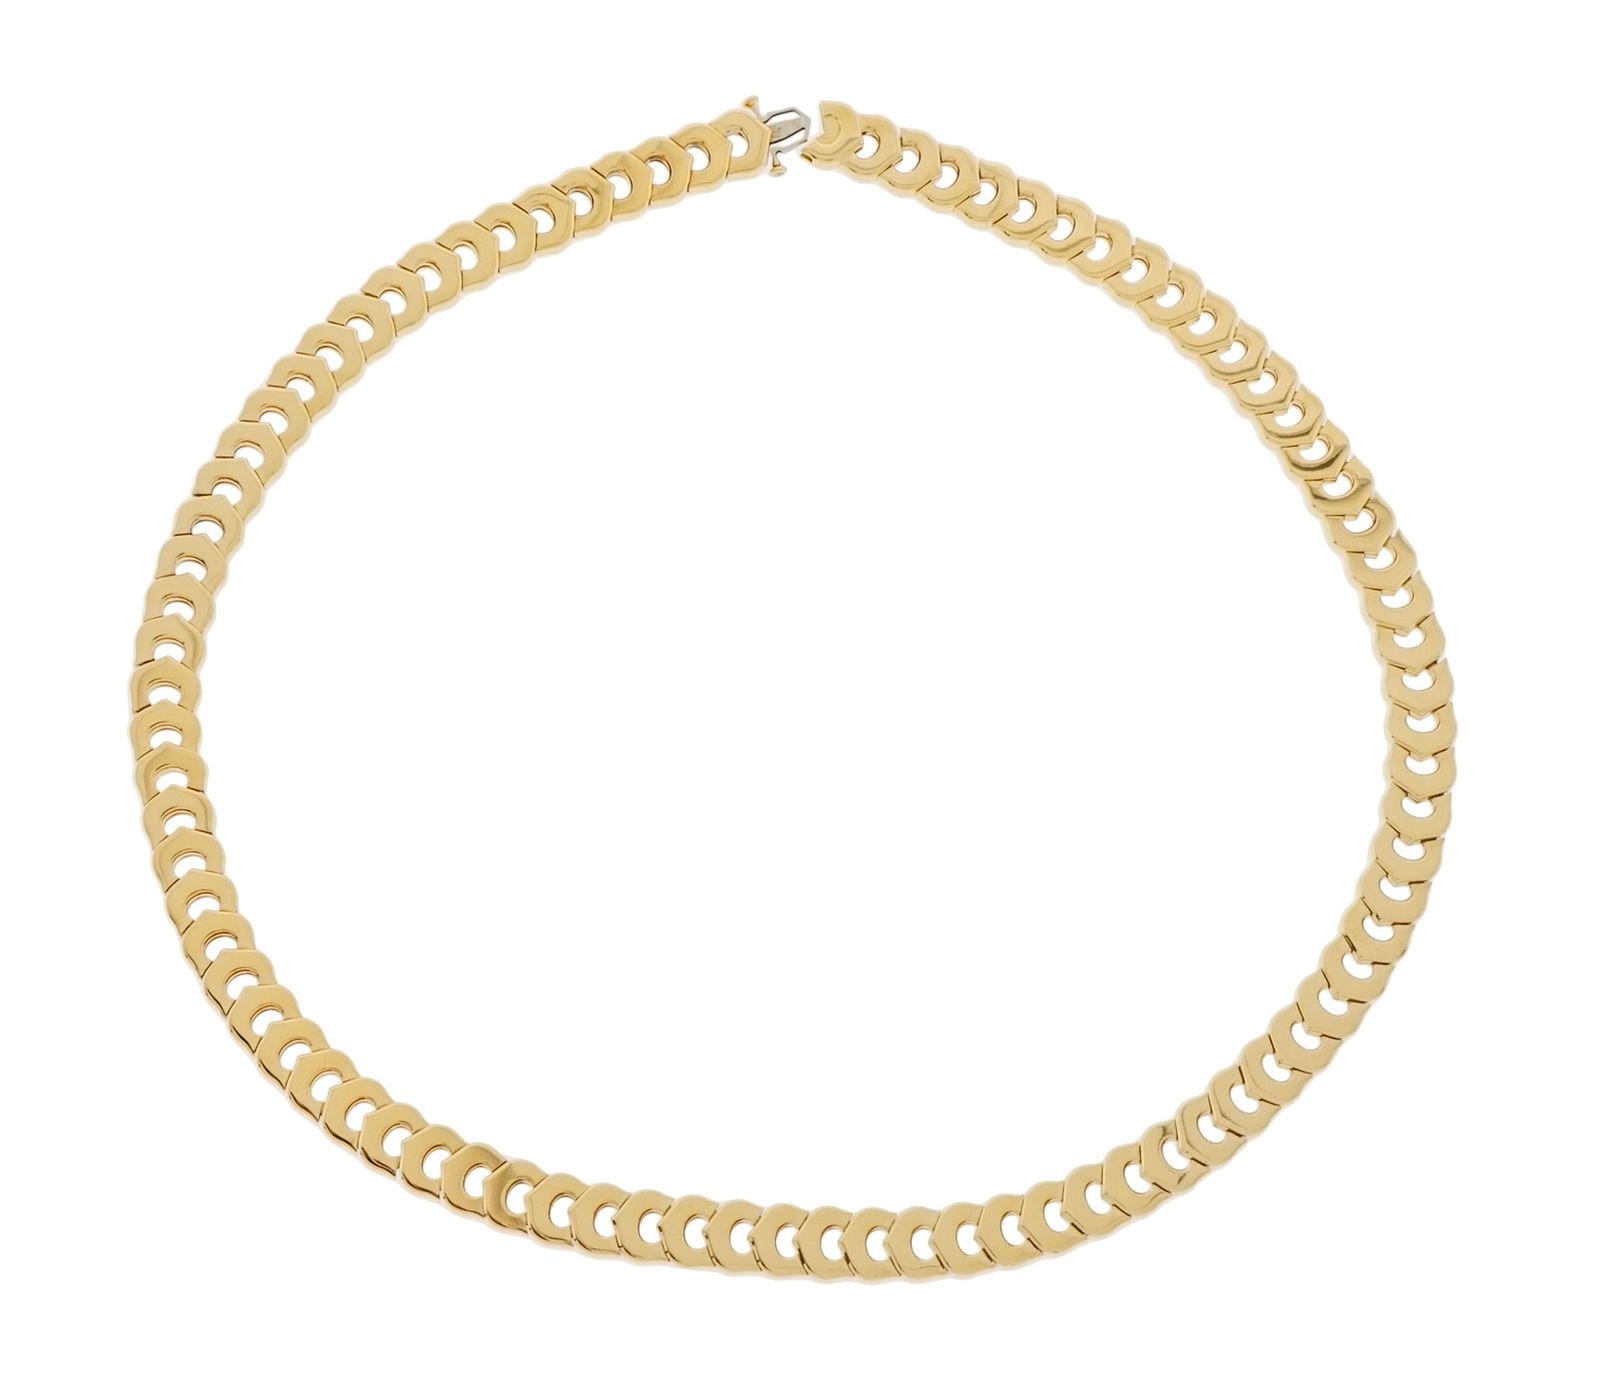 cartier gold chains for women